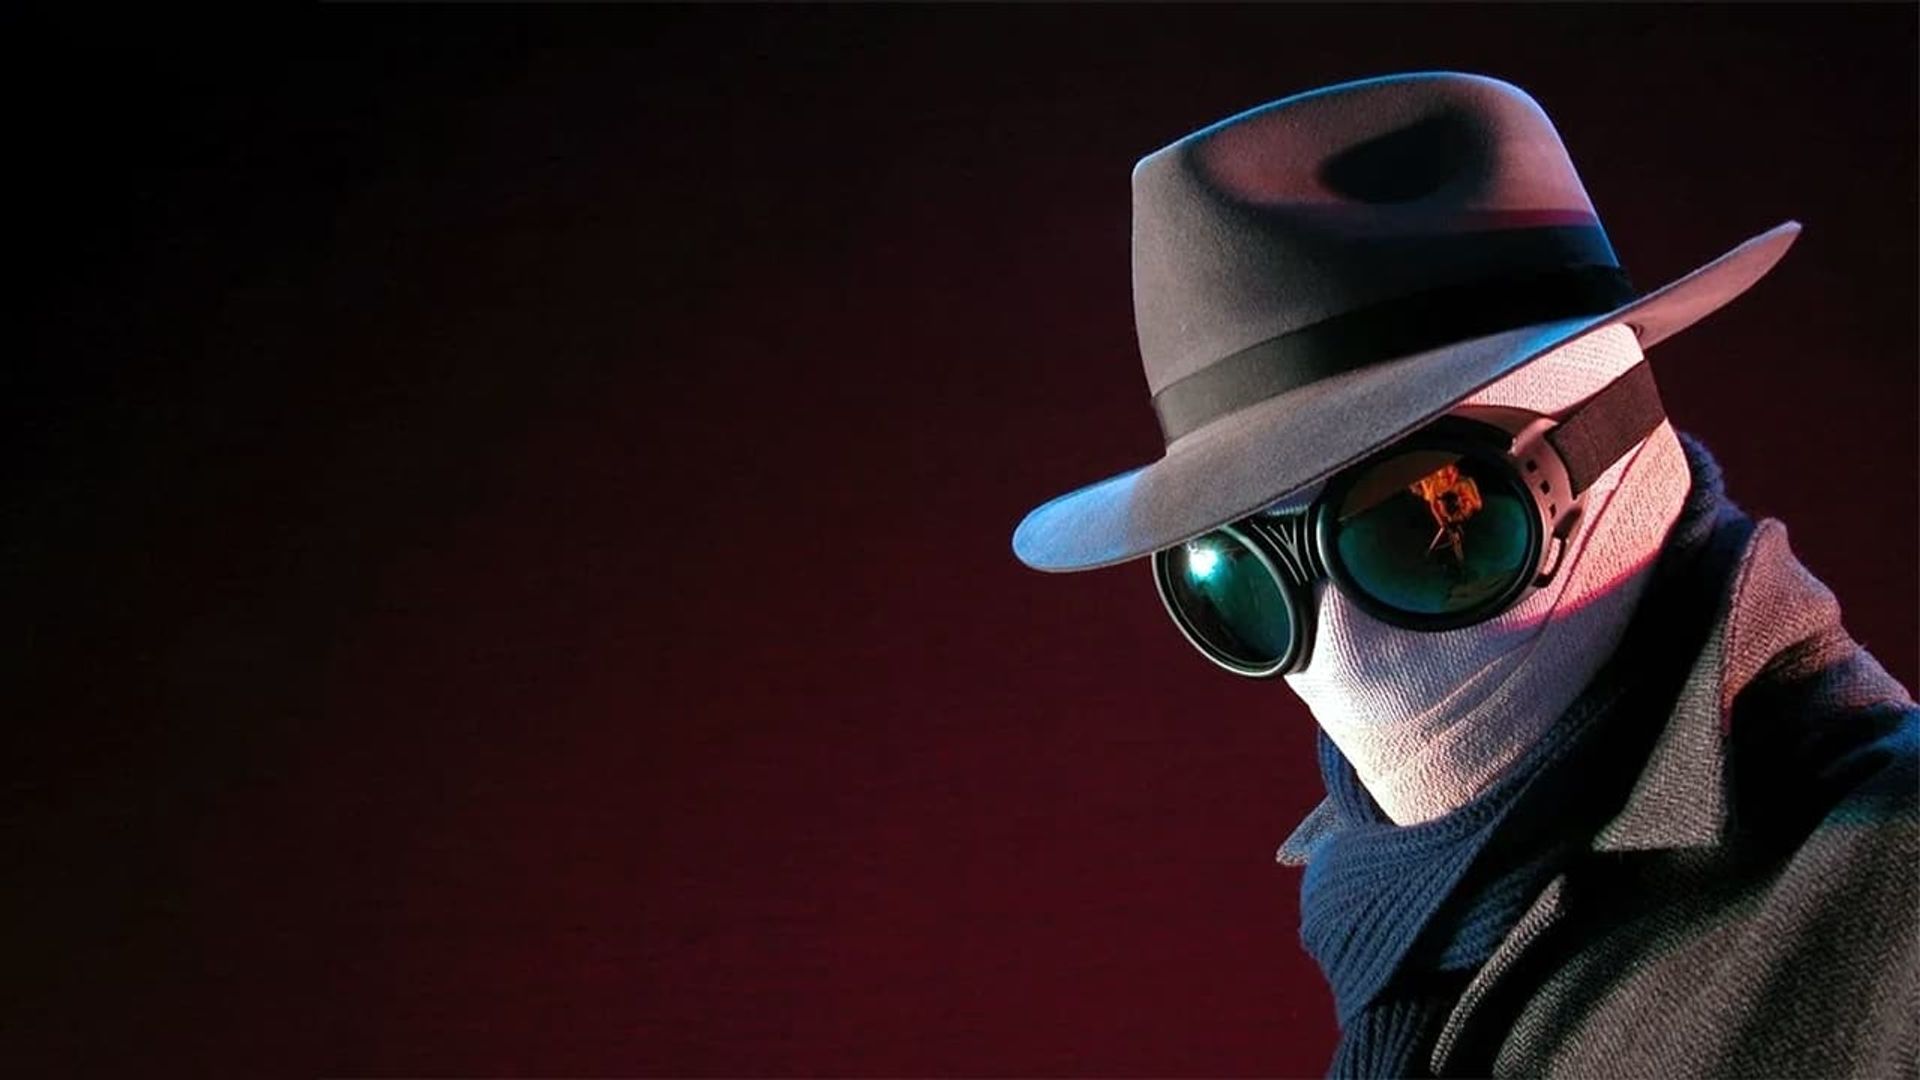 The Invisible Man background